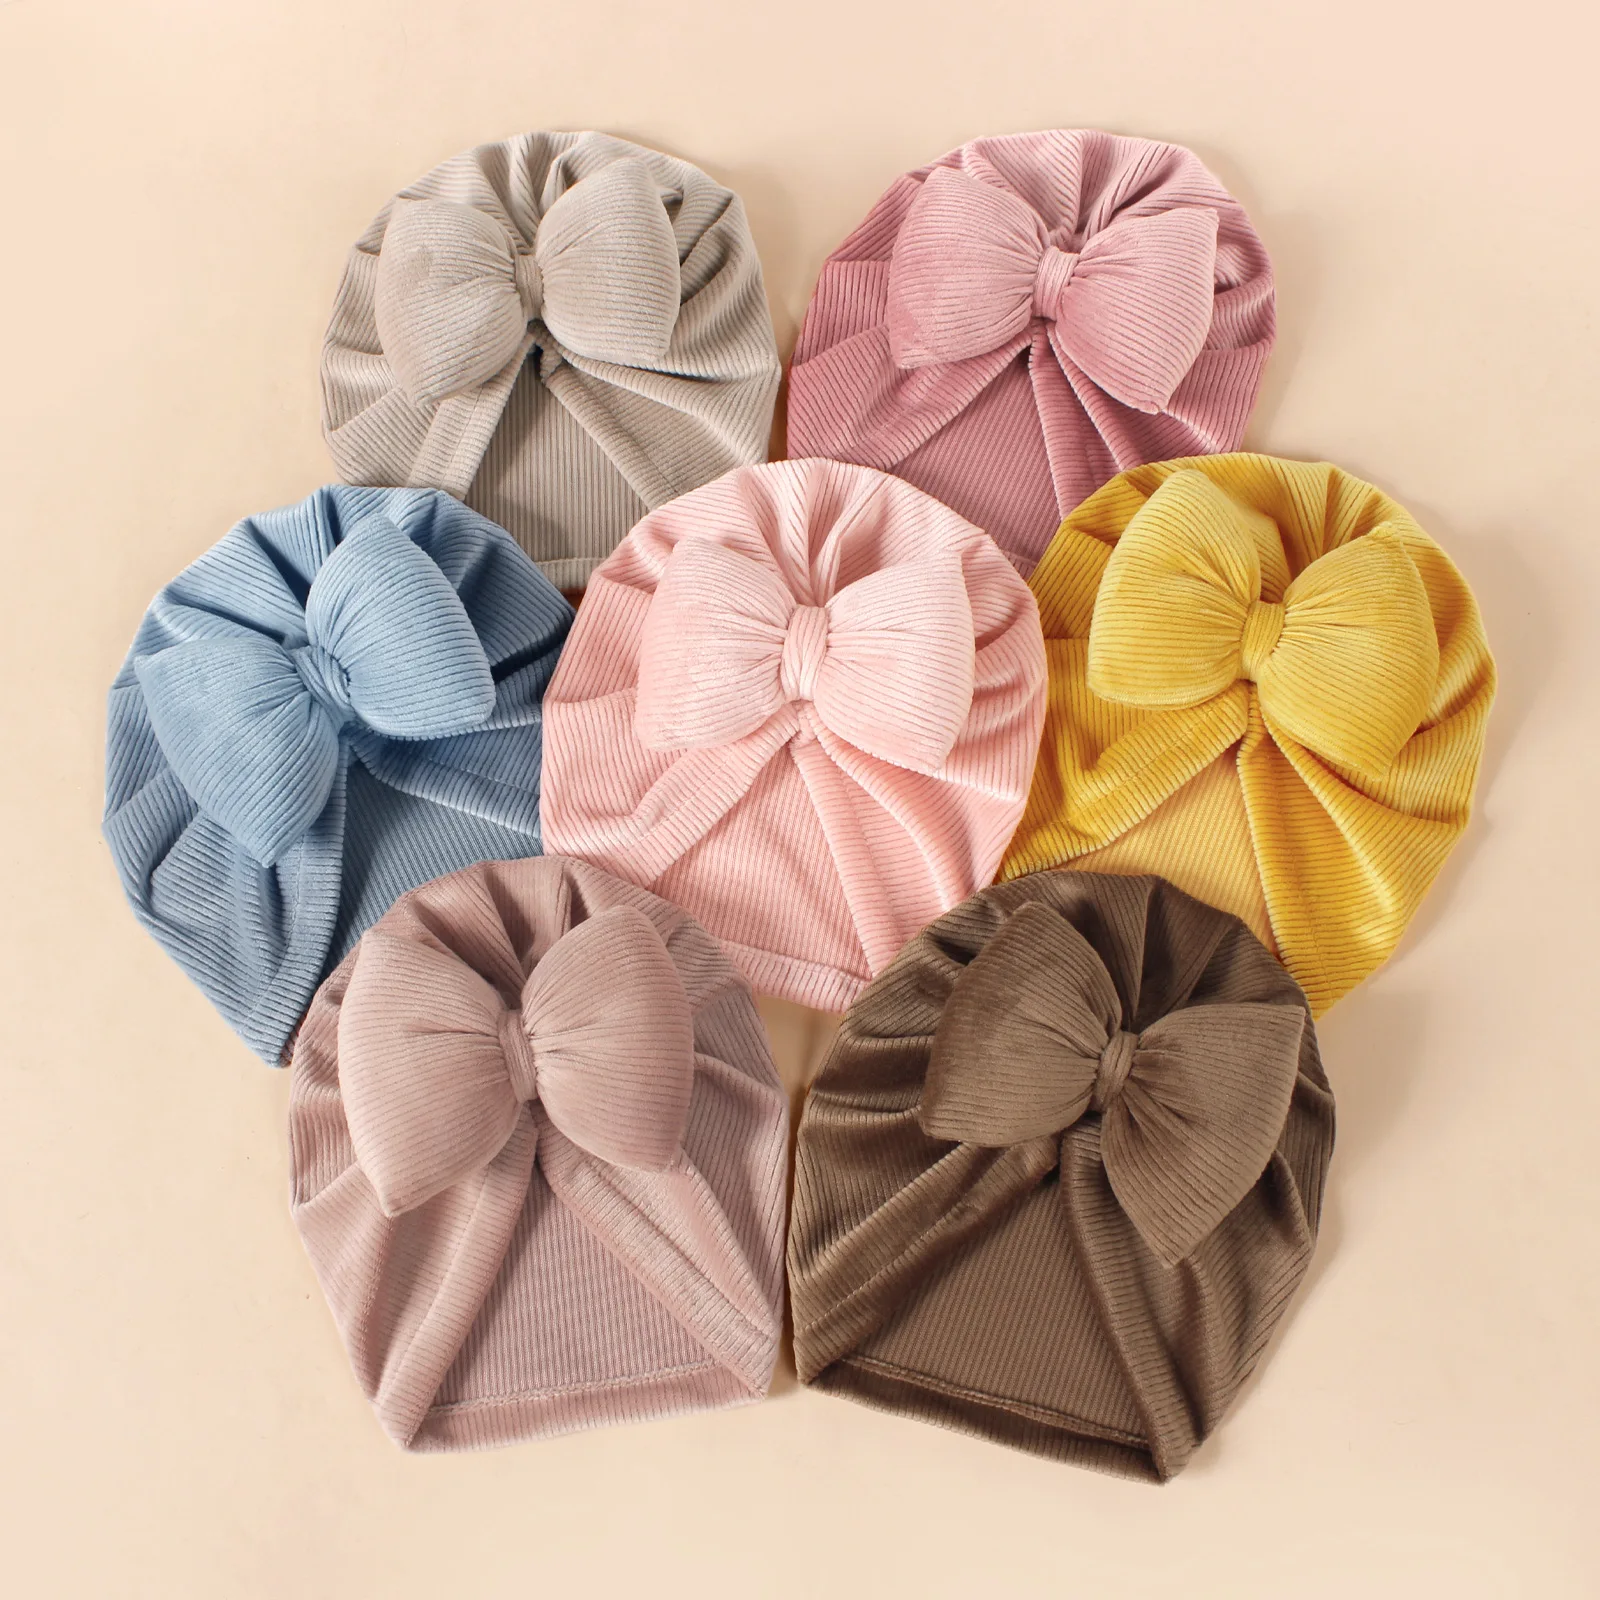 

16 PCS/Lot Padded Bow Corduroy Fabric Baby Hat Infant Toddlers Ear Warmer Turban Beanies India Hat Hair Accessories